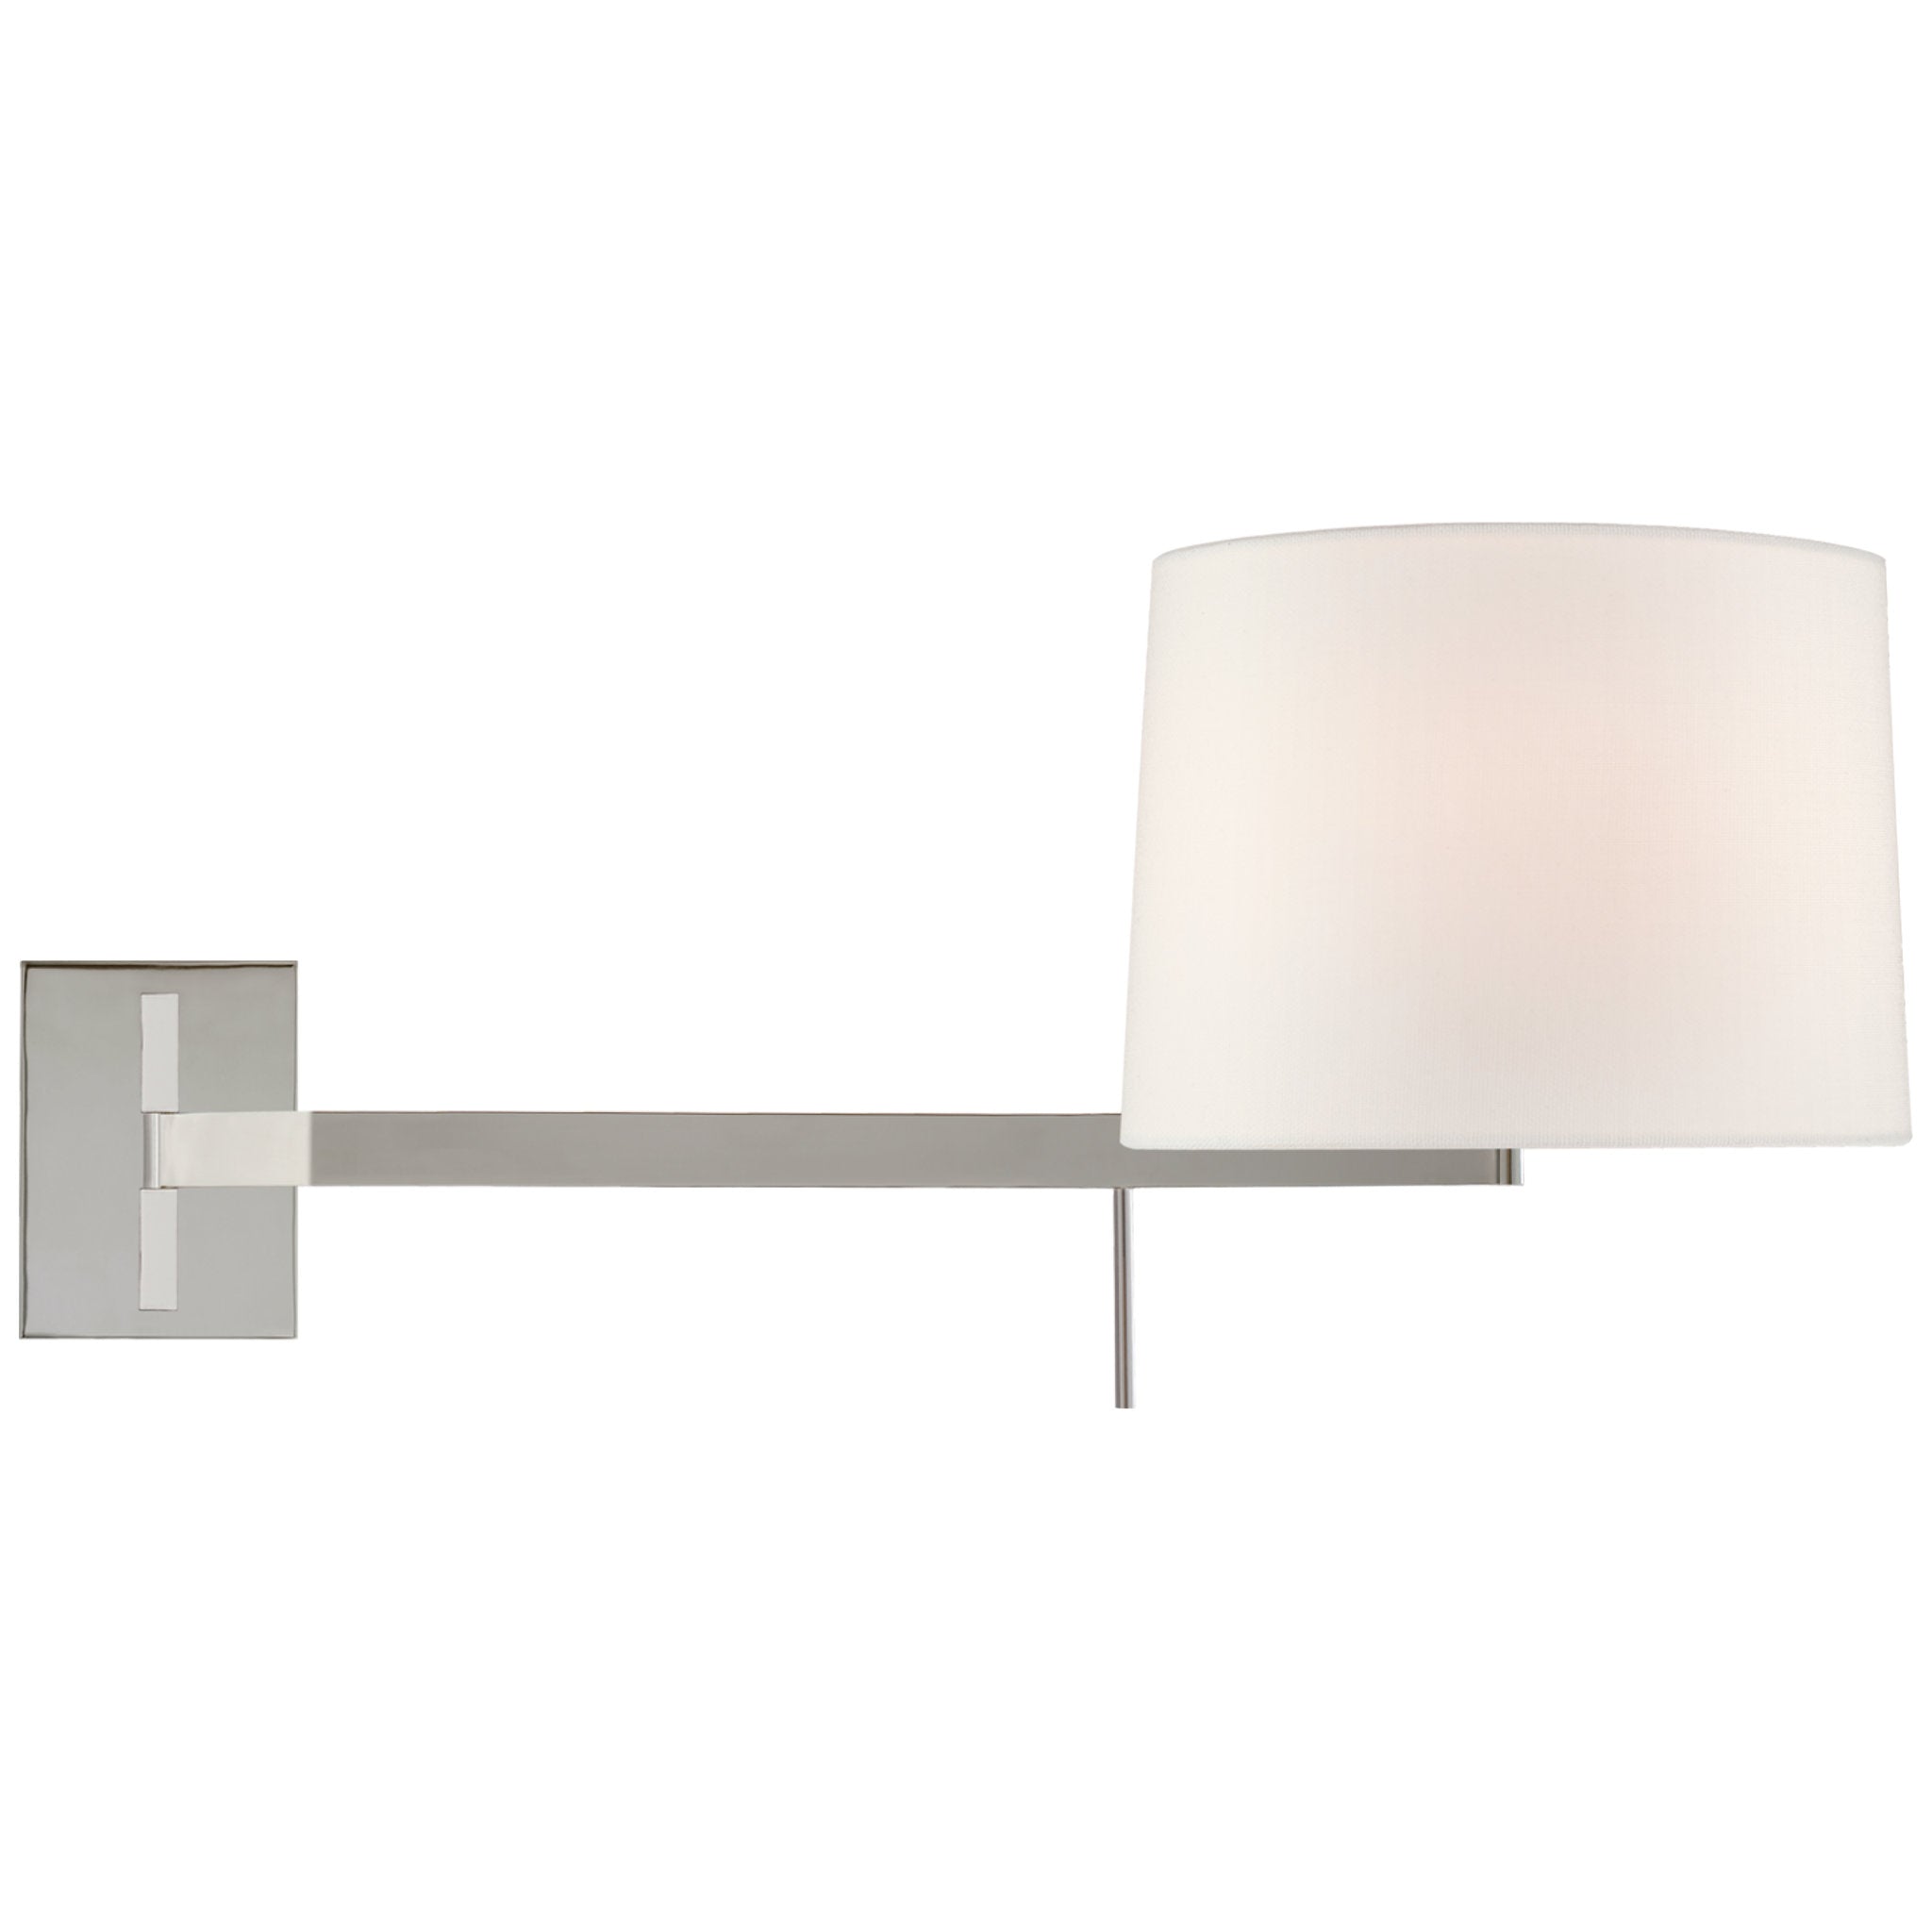 Barbara Barry Sweep Medium Left Articulating Sconce in Polished Nickel with Linen Shade